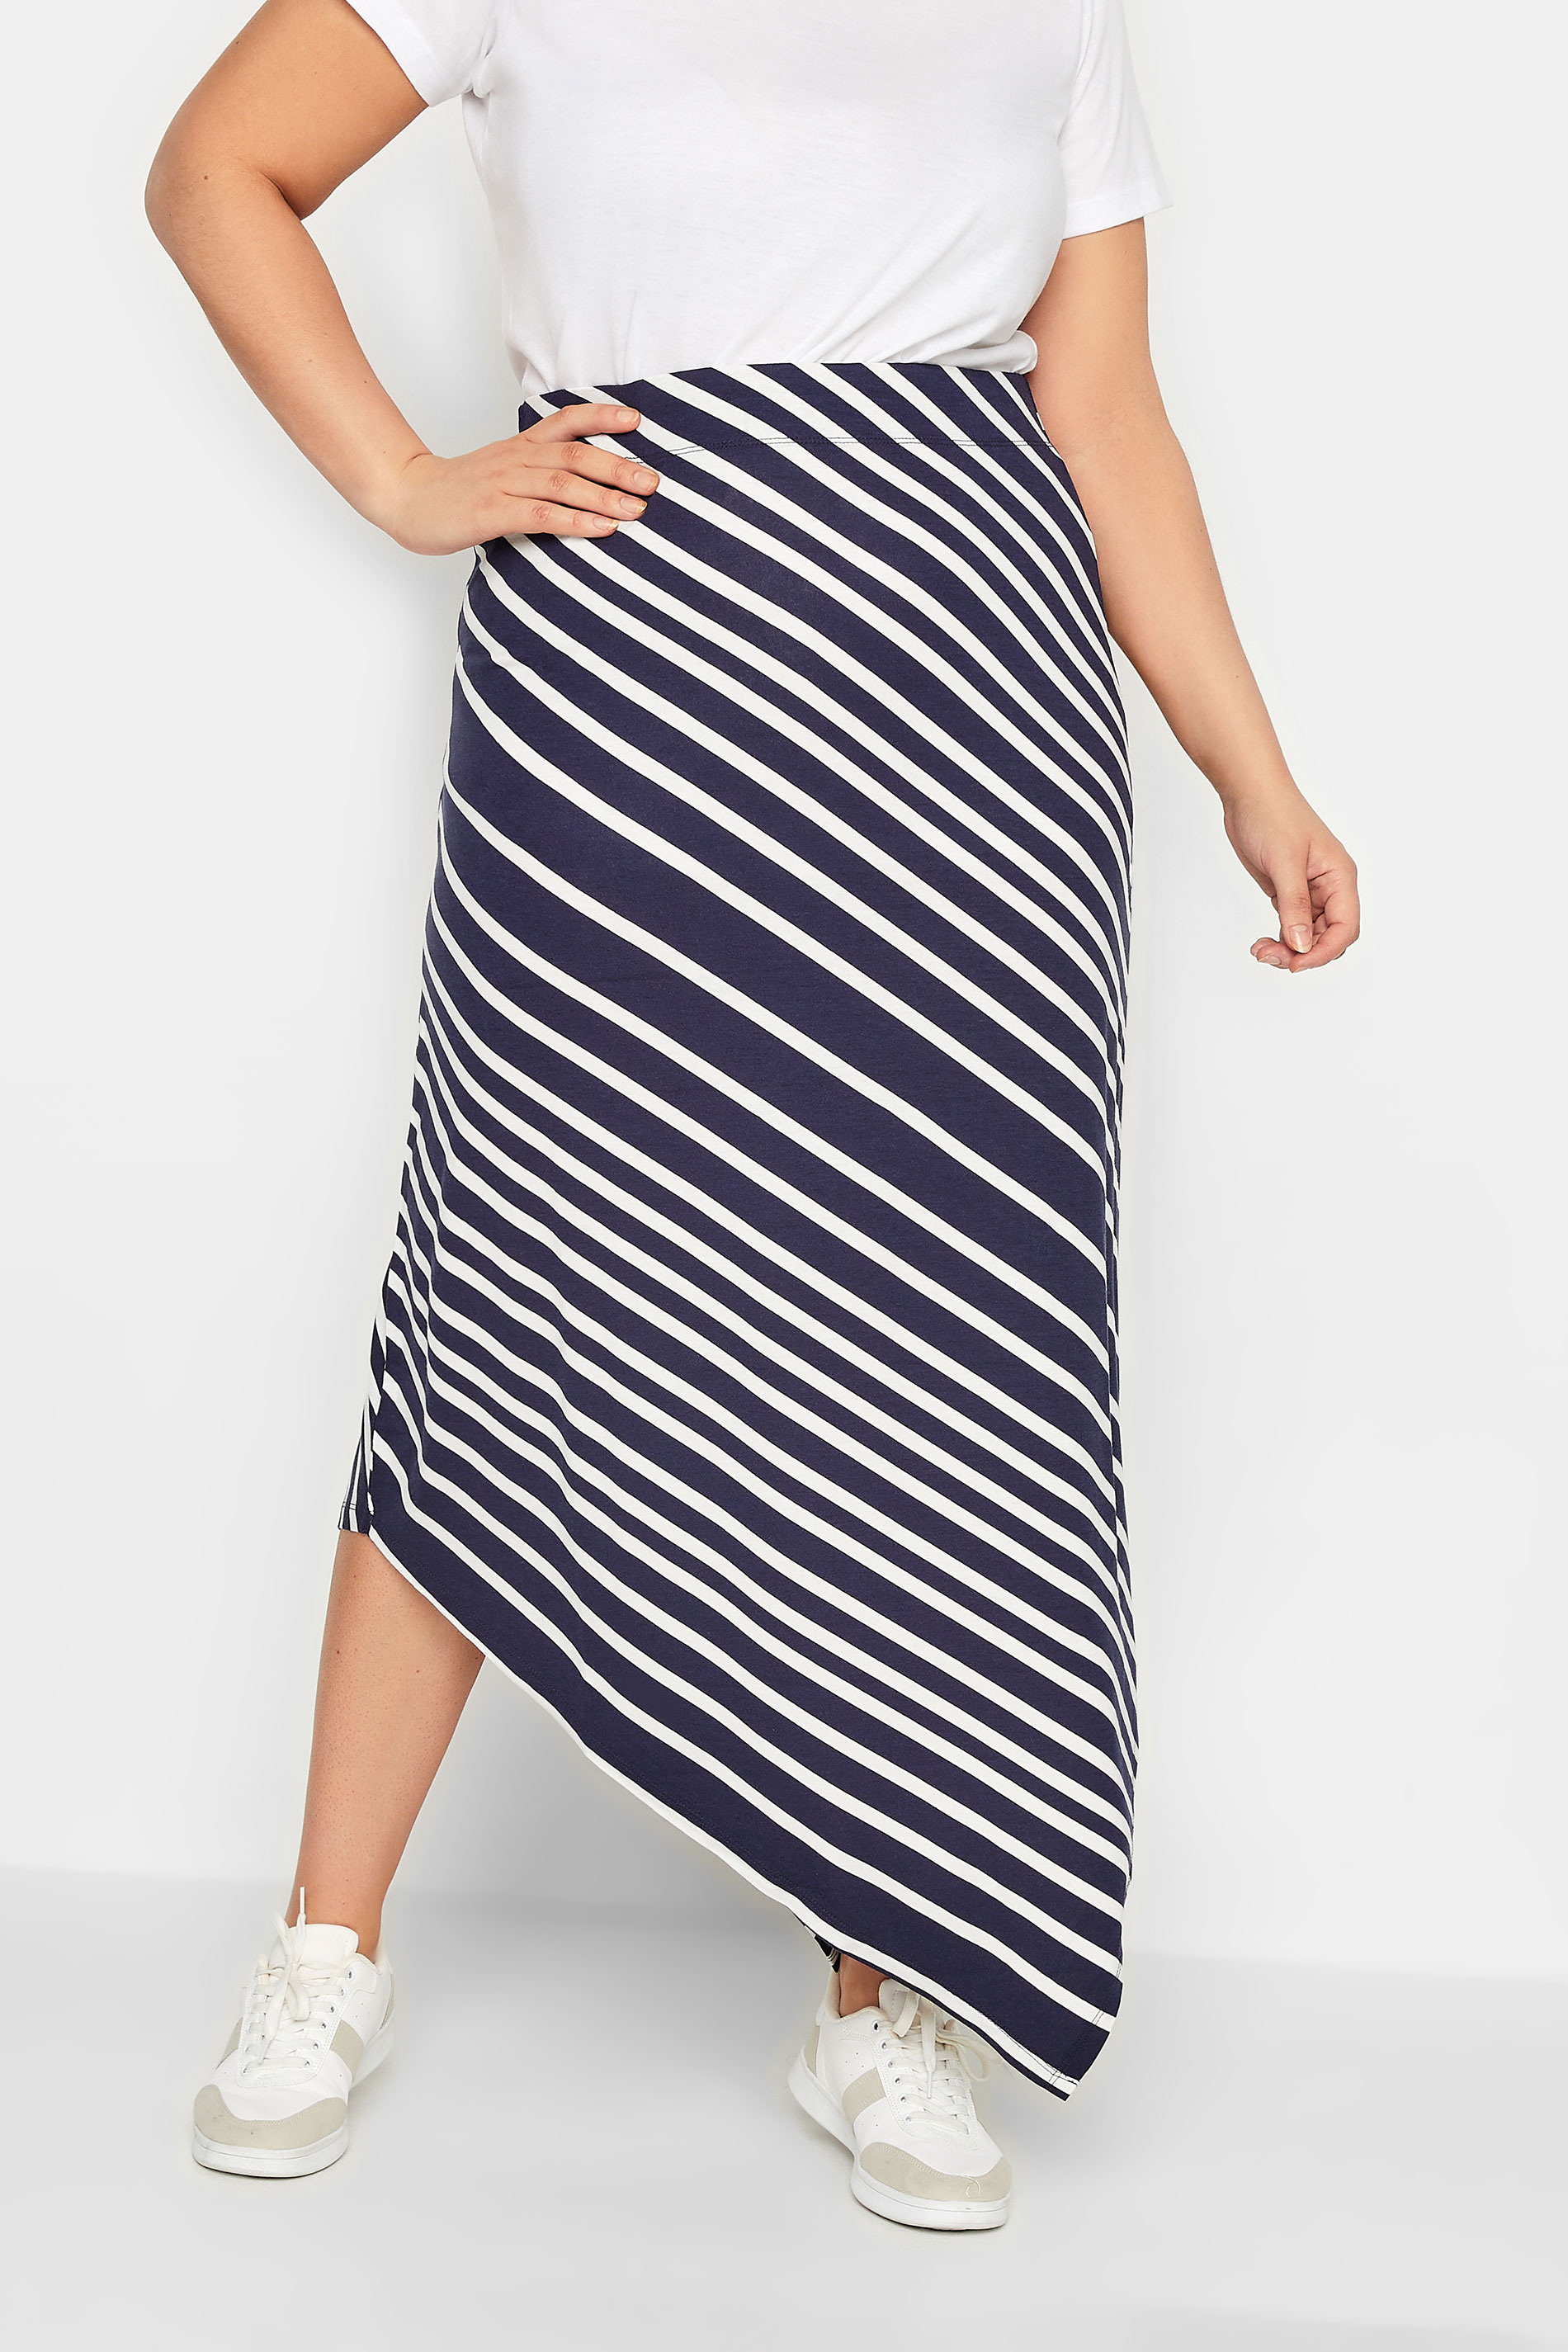 YOURS Curve Plus Size Navy Blue Stripe Asymmetric Skirt | Yours Clothing  1